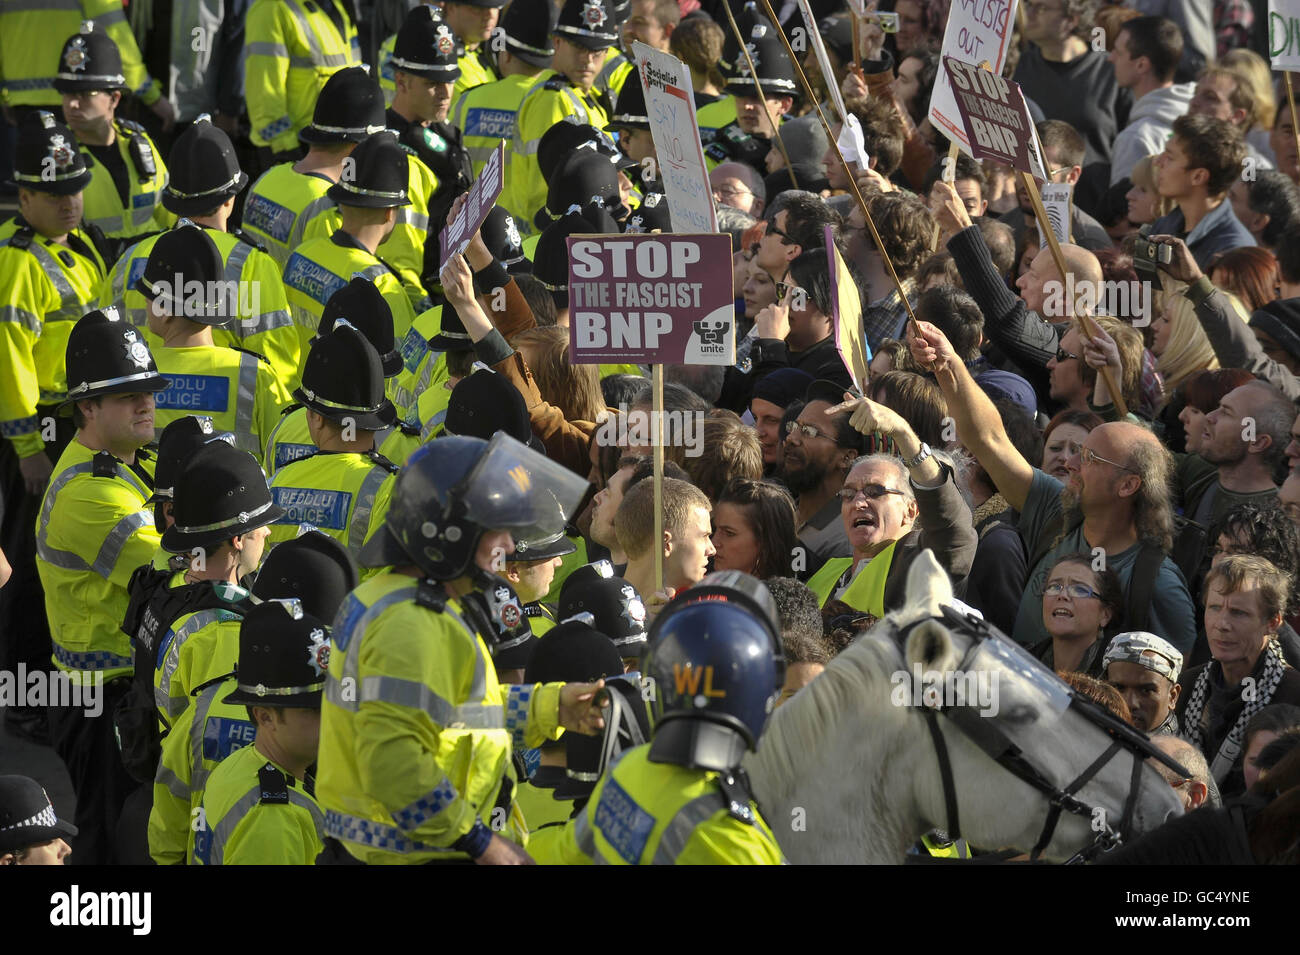 Police hold back chanting anti-fascist protesters during a protest near Castle Square, Swansea, Wales. Stock Photo